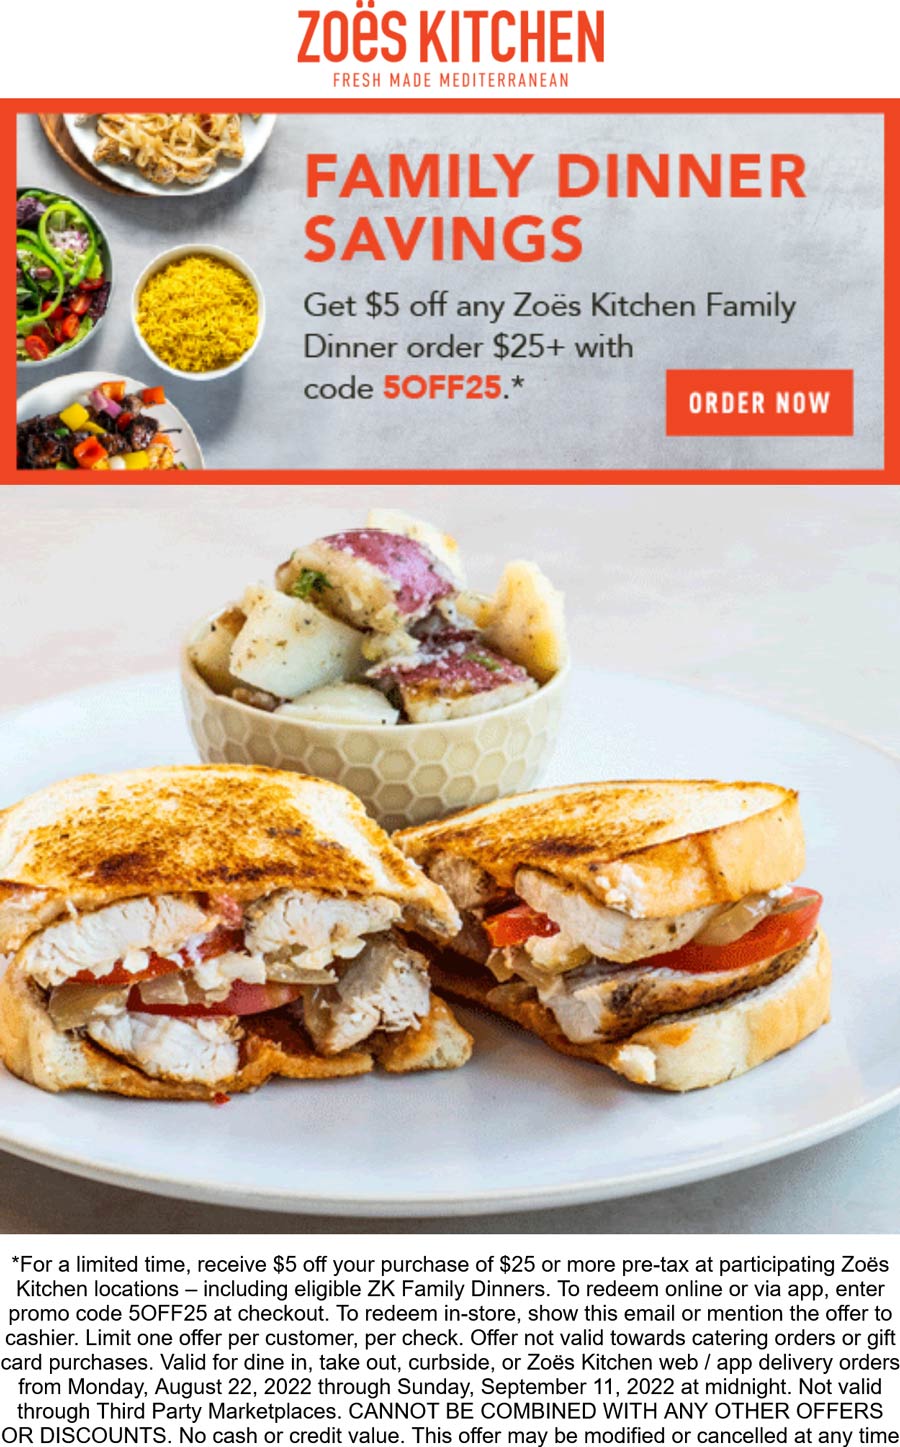 Zoes Kitchen restaurants Coupon  $5 off $25 on dinner at Zoes Kitchen via promo code 5OFF25 #zoeskitchen 